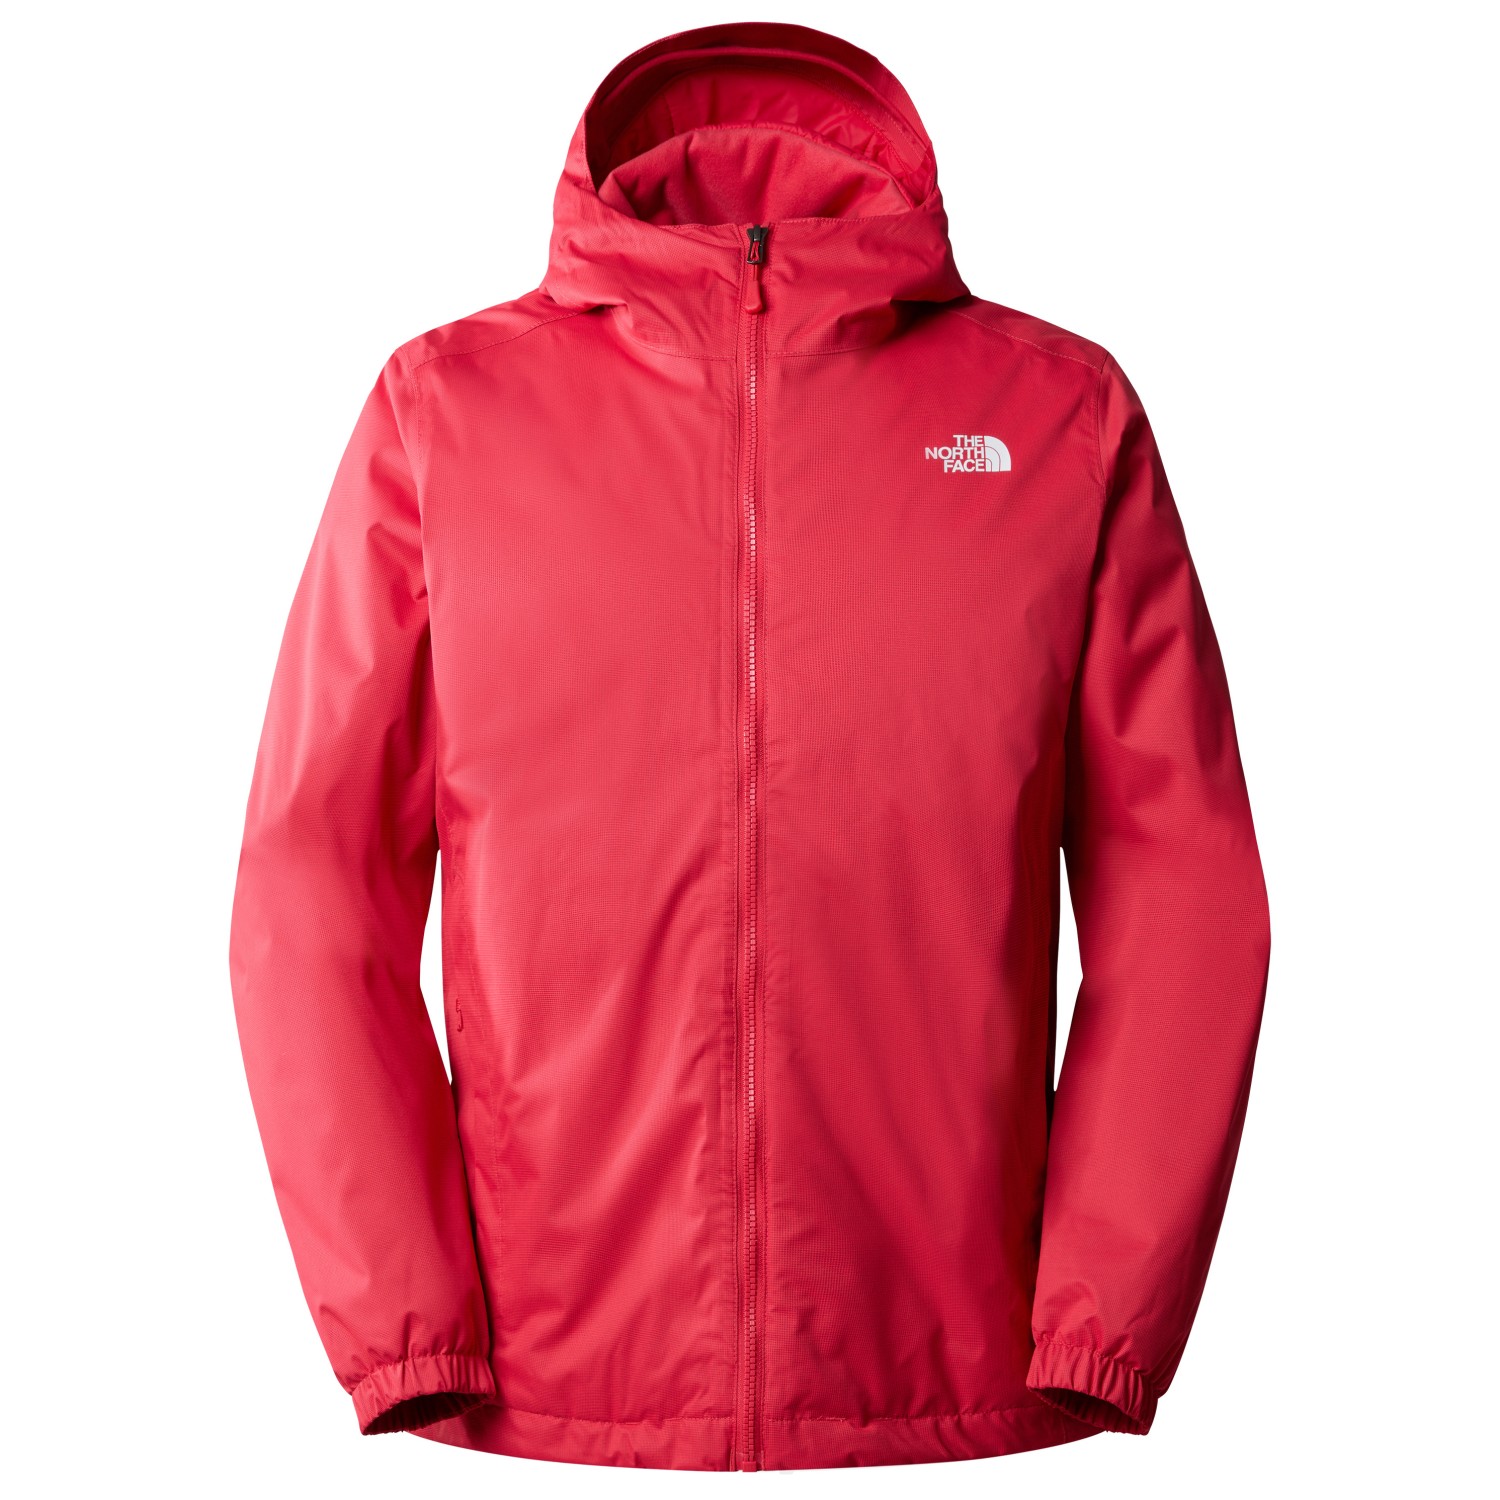 Зимняя куртка The North Face Quest Insulated, цвет Clay Red Black Heather зимняя куртка the north face women s quest insulated цвет boysenberry